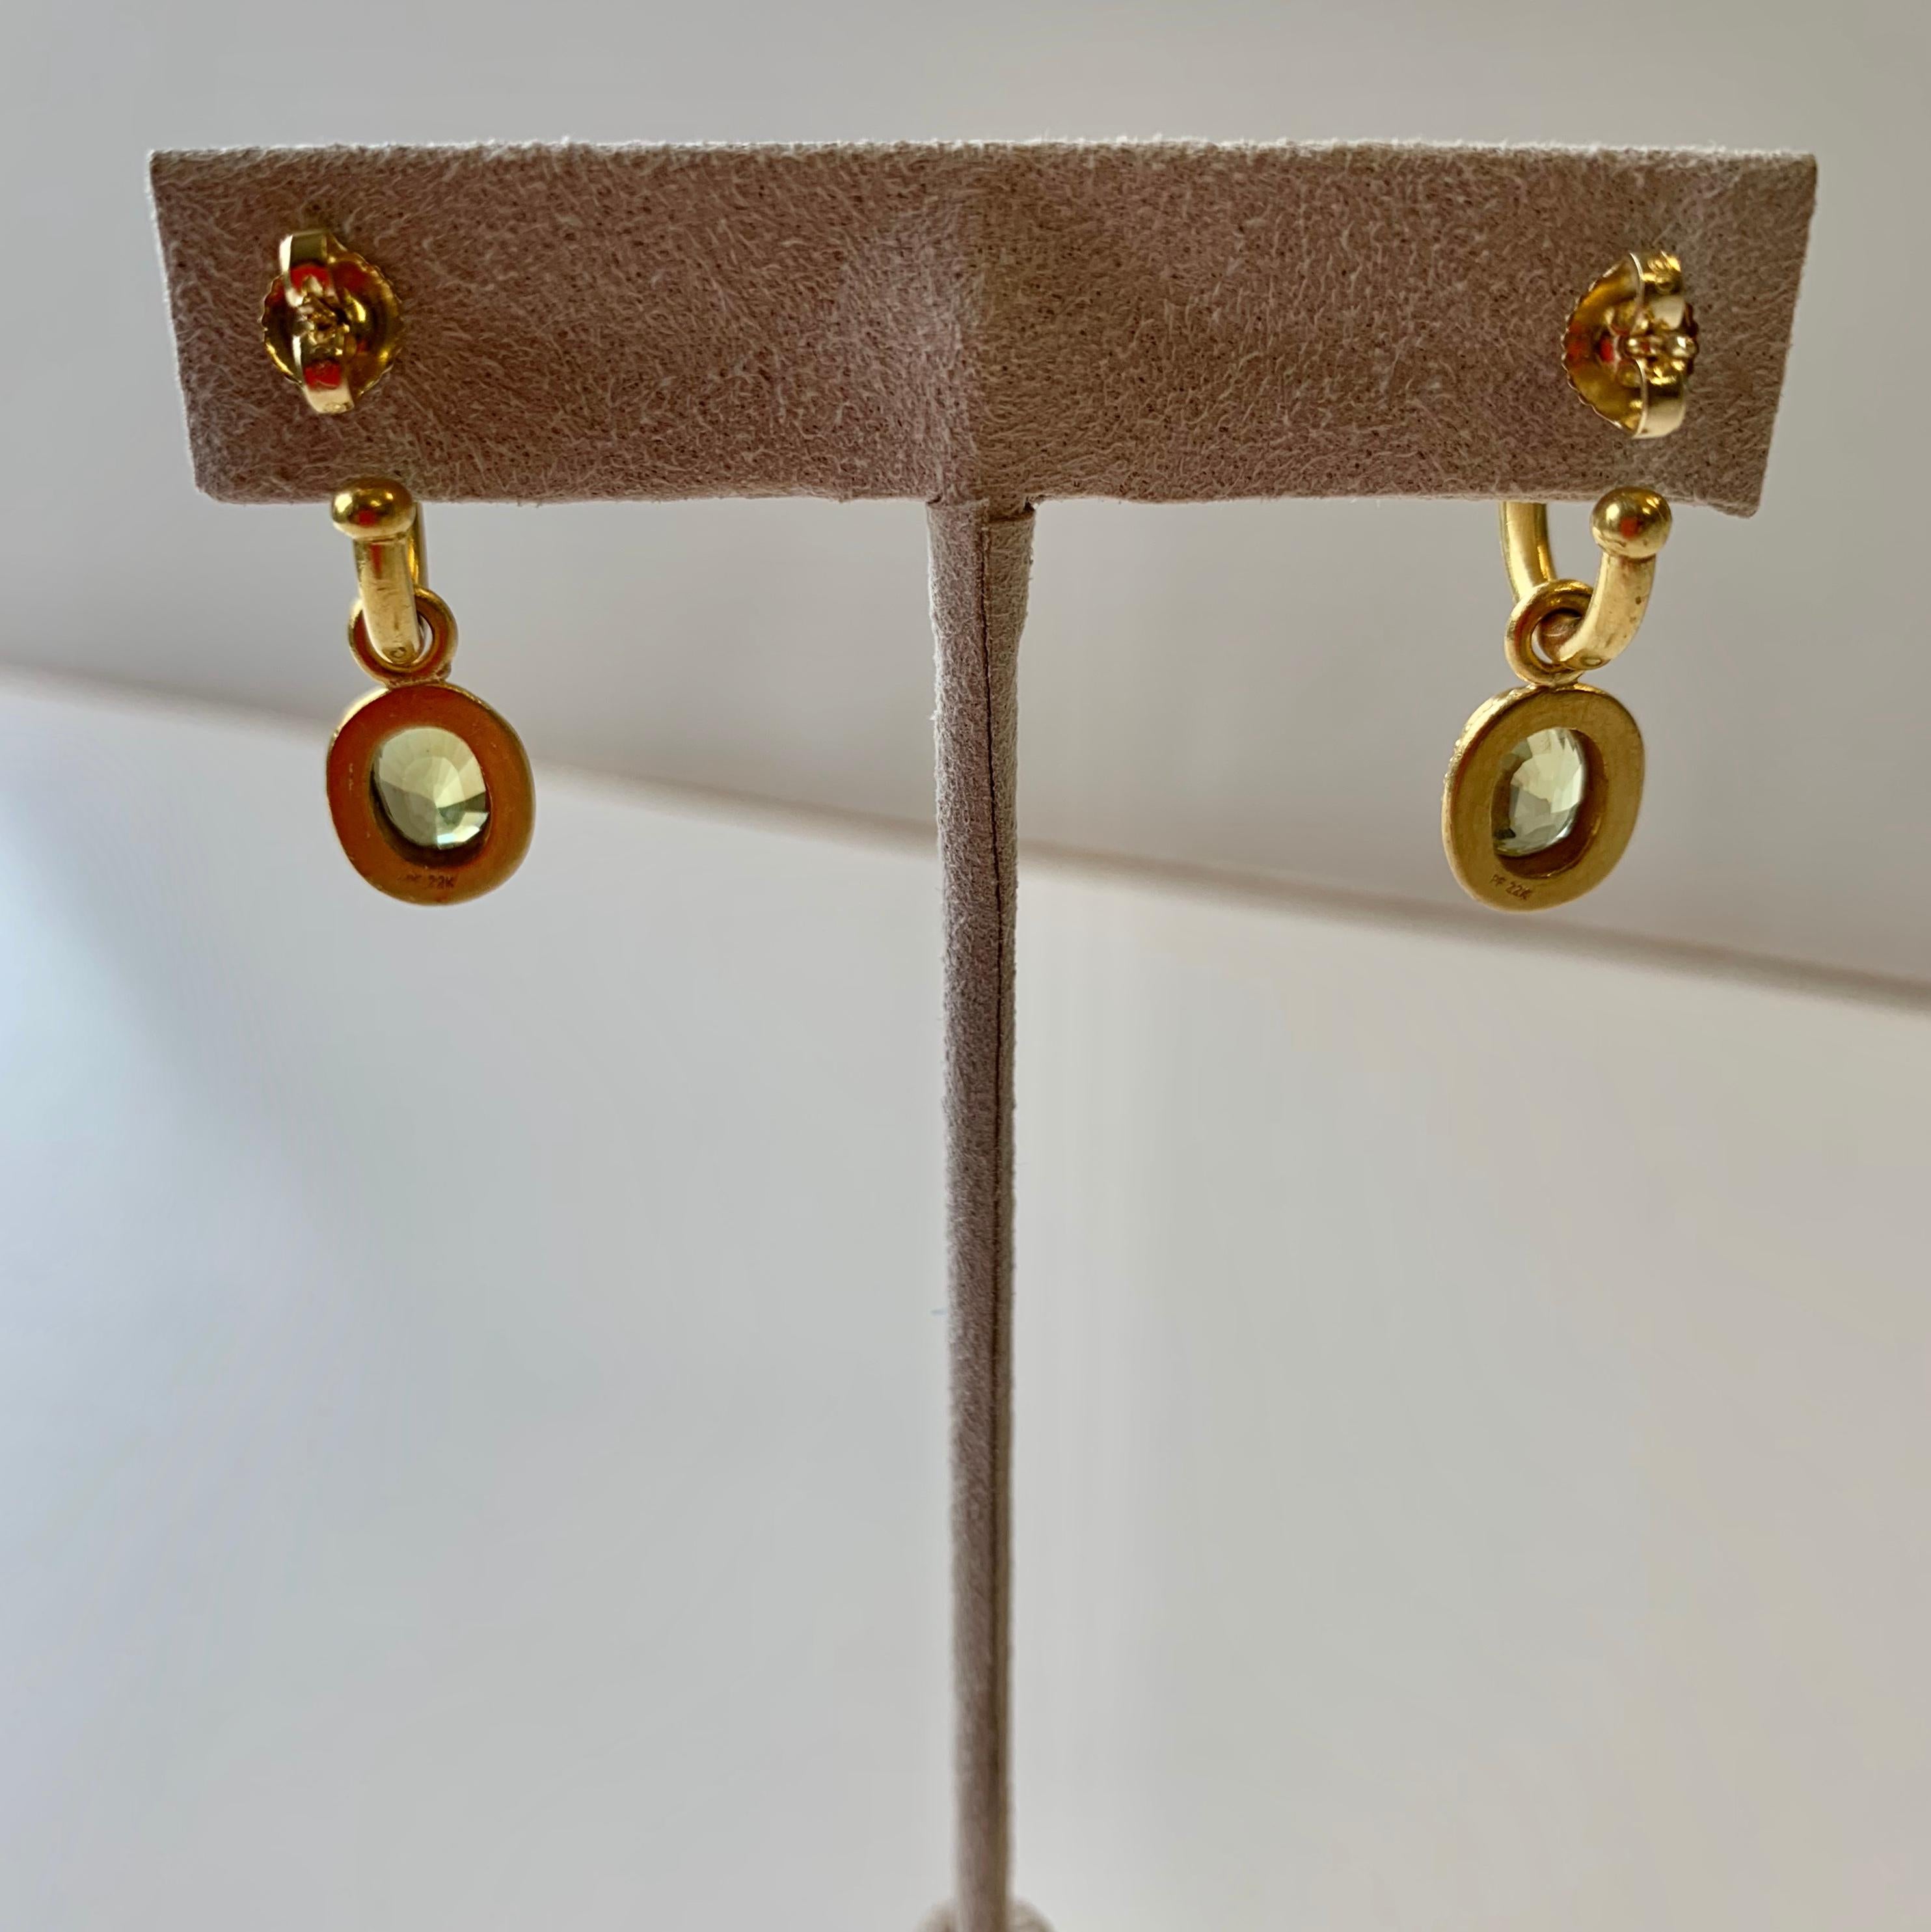 Entirely handmade 22 karat gold hoop earrings with incredibly sparkly, fine oval chrysoberyl drops. Chrysoberyl is a rare gem that is both brilliant in color and extremely durable. The Chrysoberyl gems found here weight 3.63 carats. They are set